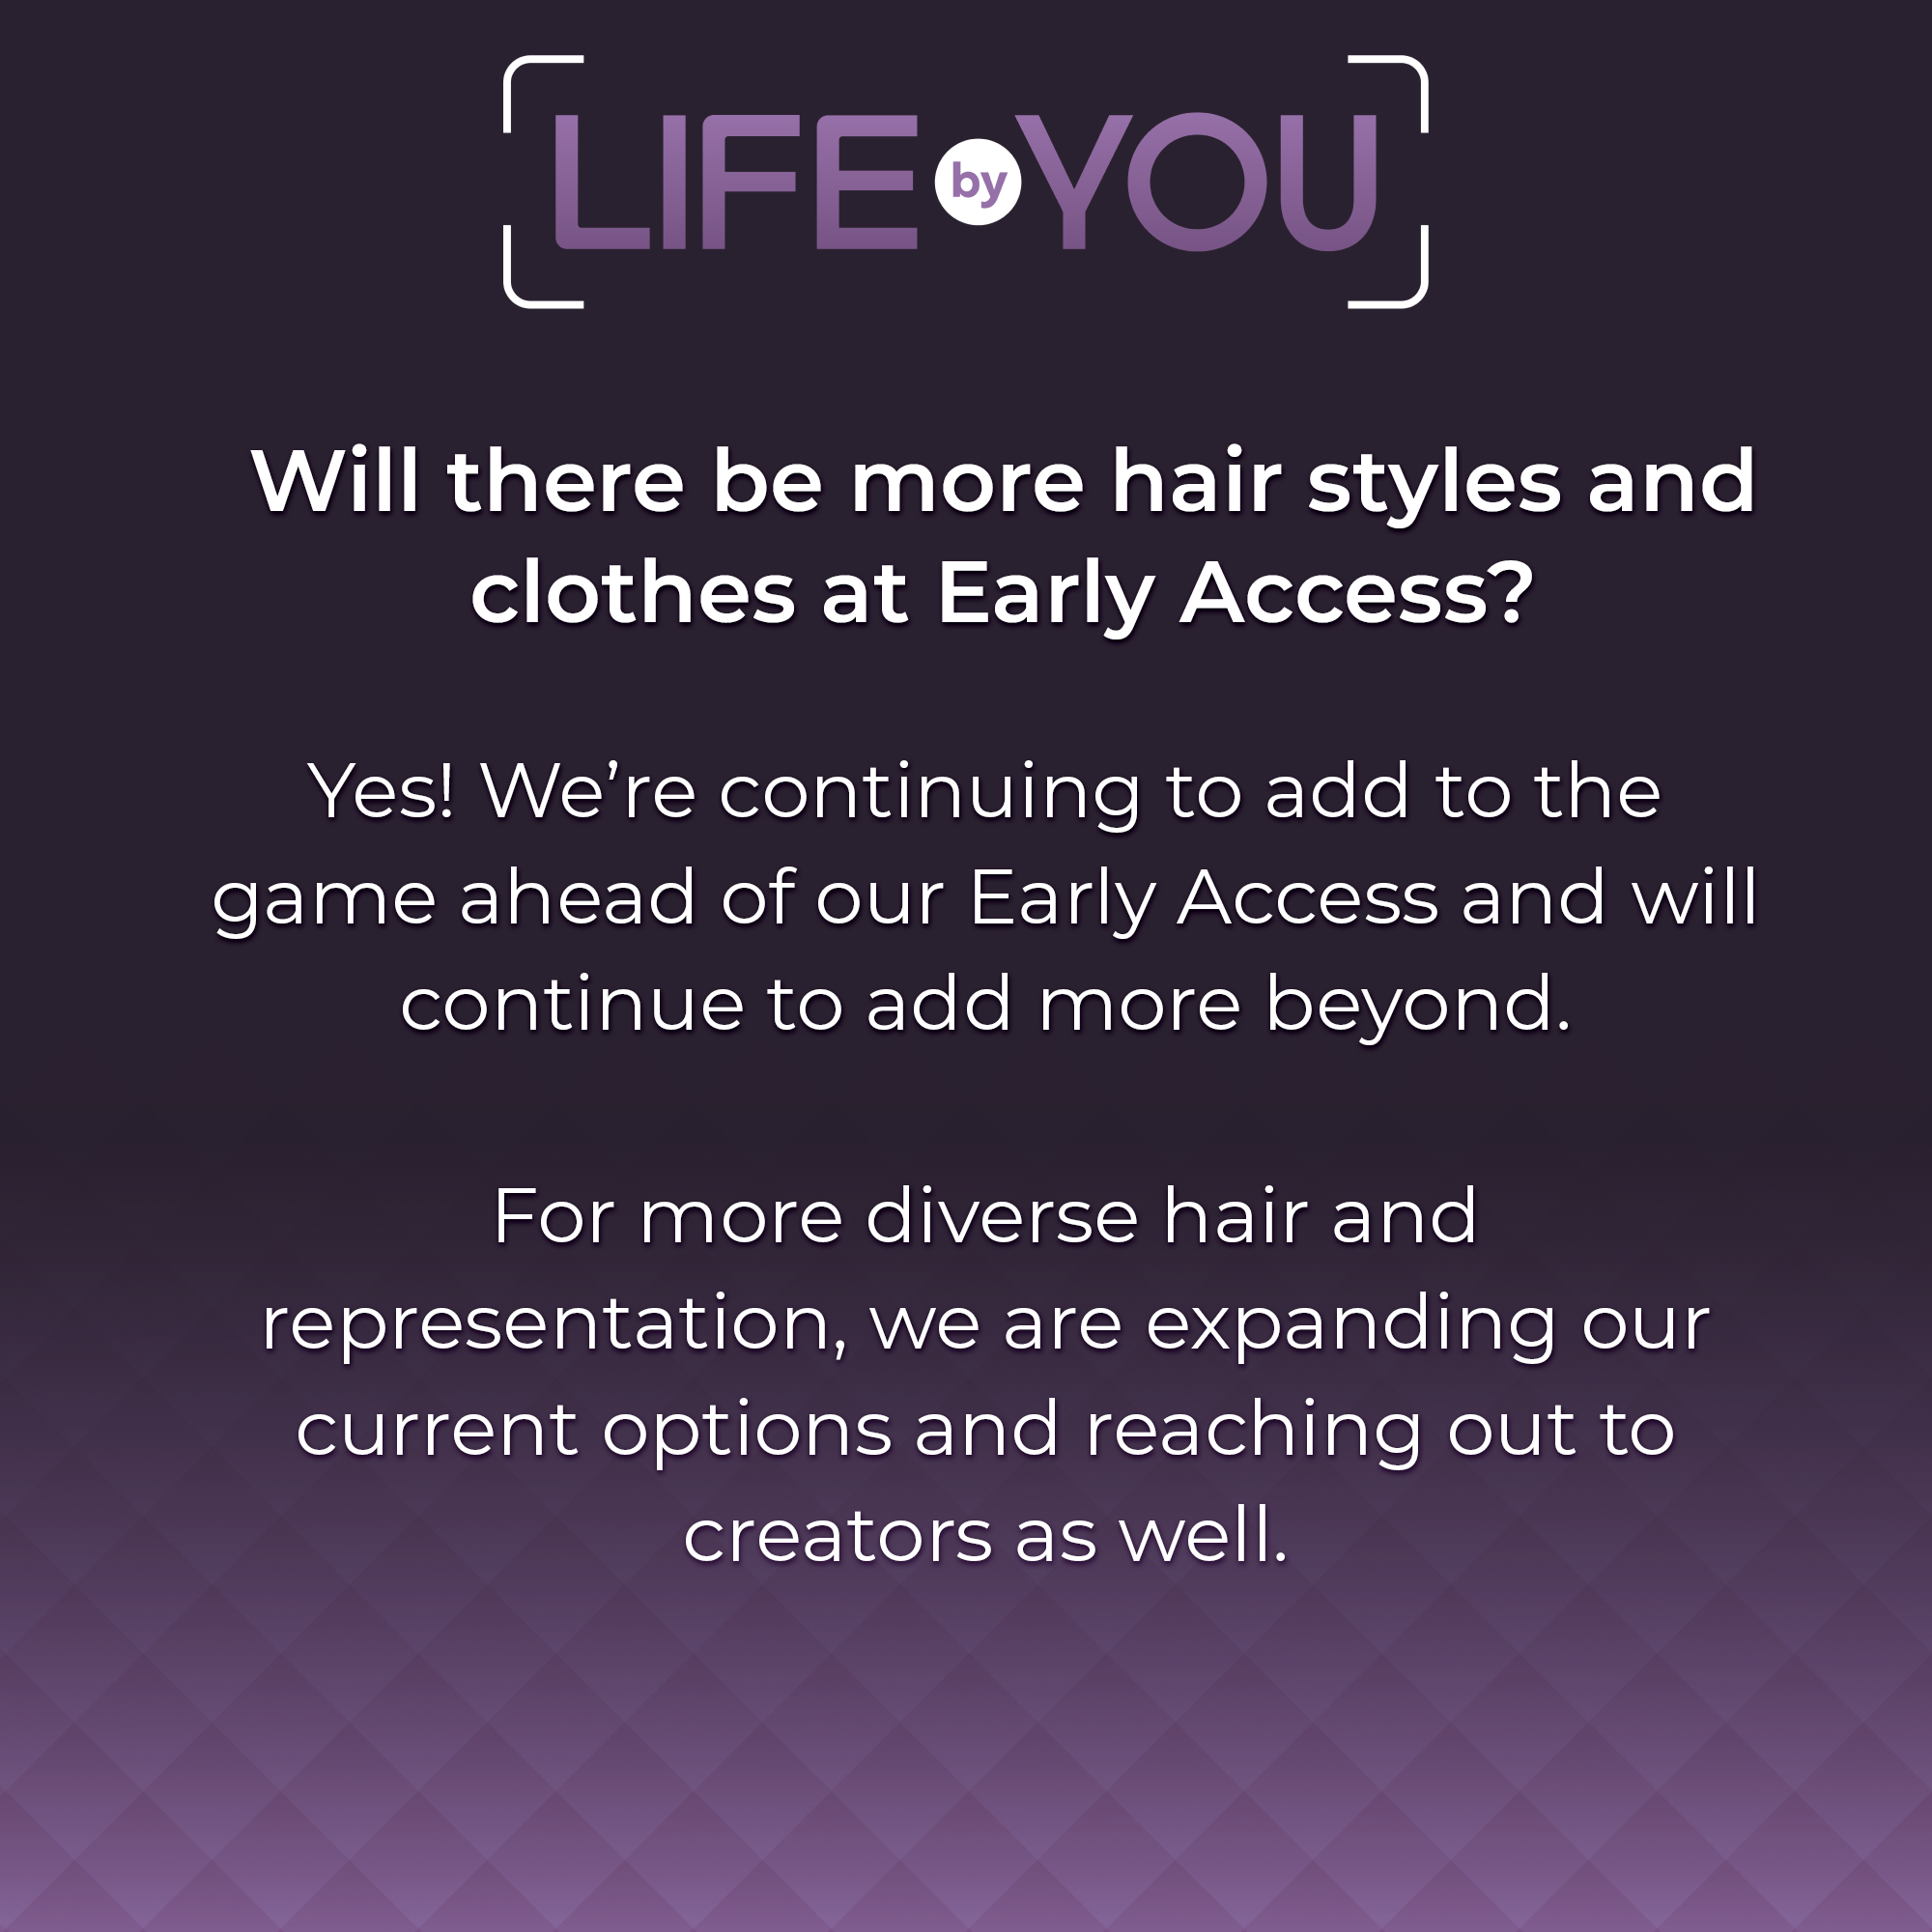 QnA Will there be more hair styles/clothes at Early Access?